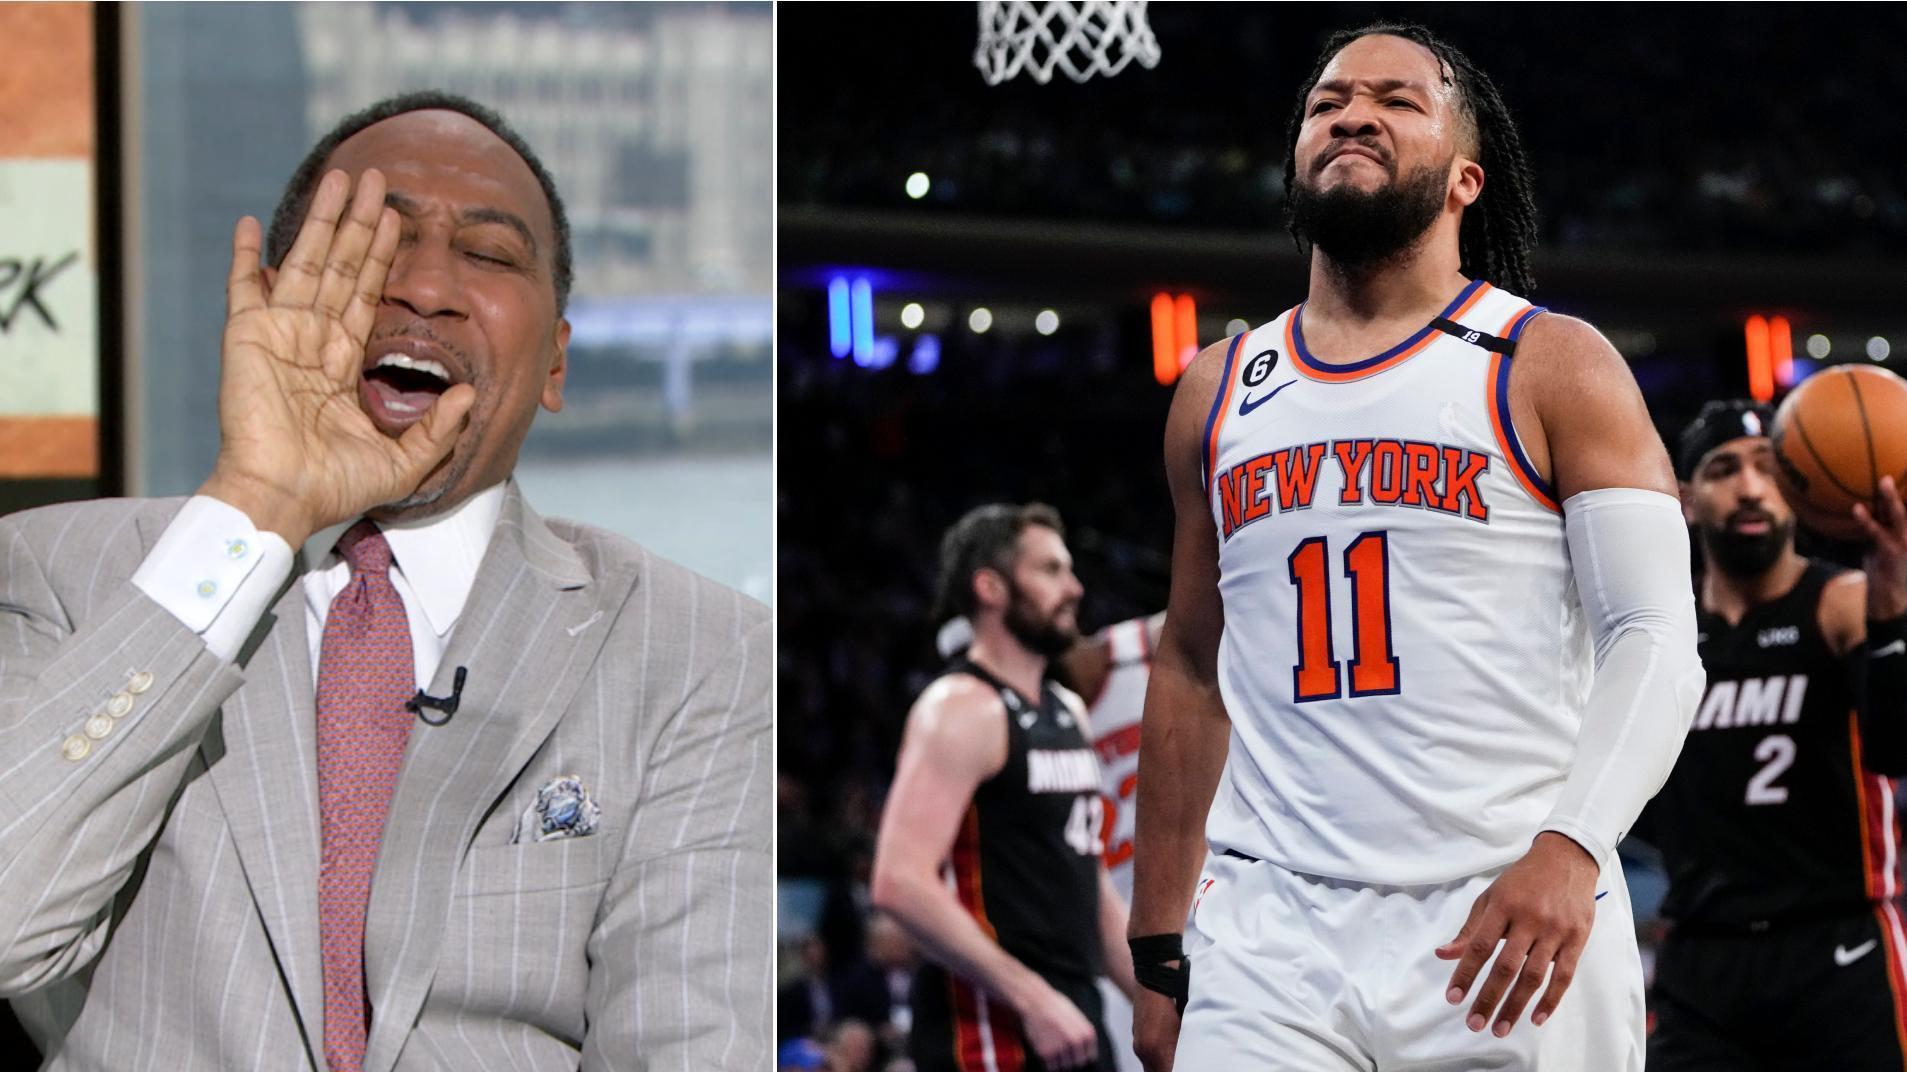 Stephen A. is fired up about his Knicks in legendary 'First Take' intro